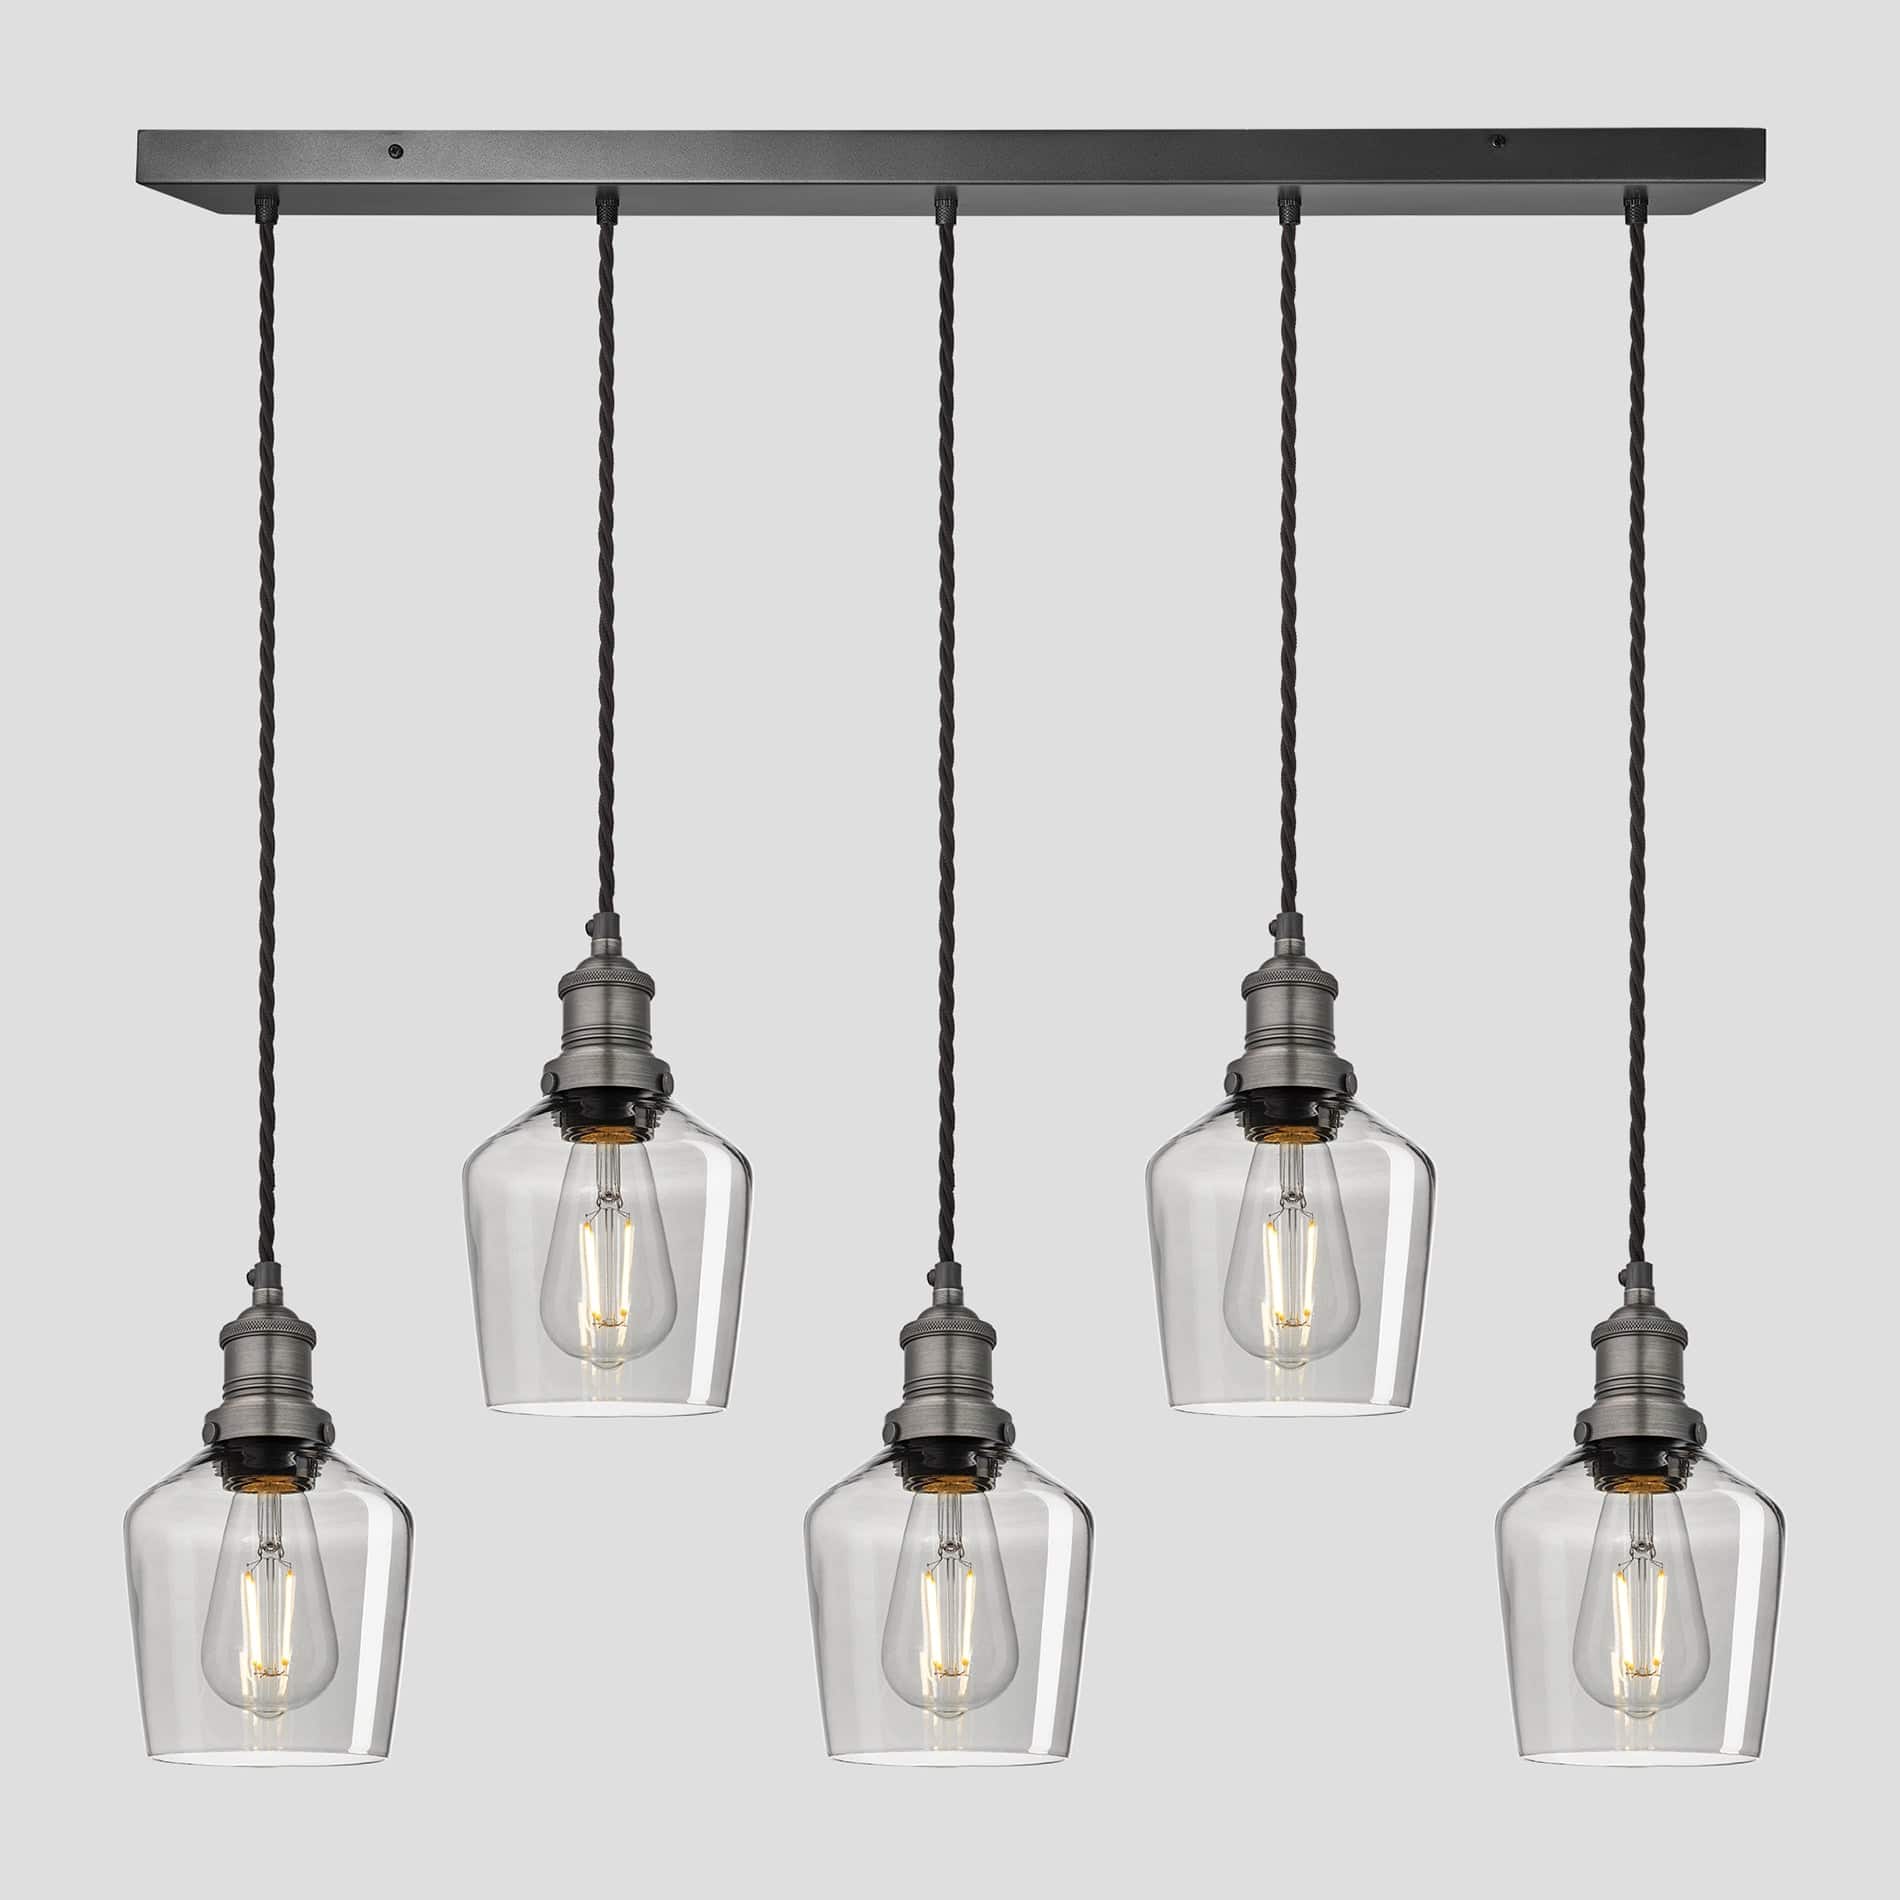 Brooklyn Tinted Glass Schoolhouse 5 Wire Cluster Lights - 5.5 inch - Smoke Grey Industville BR-TGL-SH5-5WCL-SG-PH